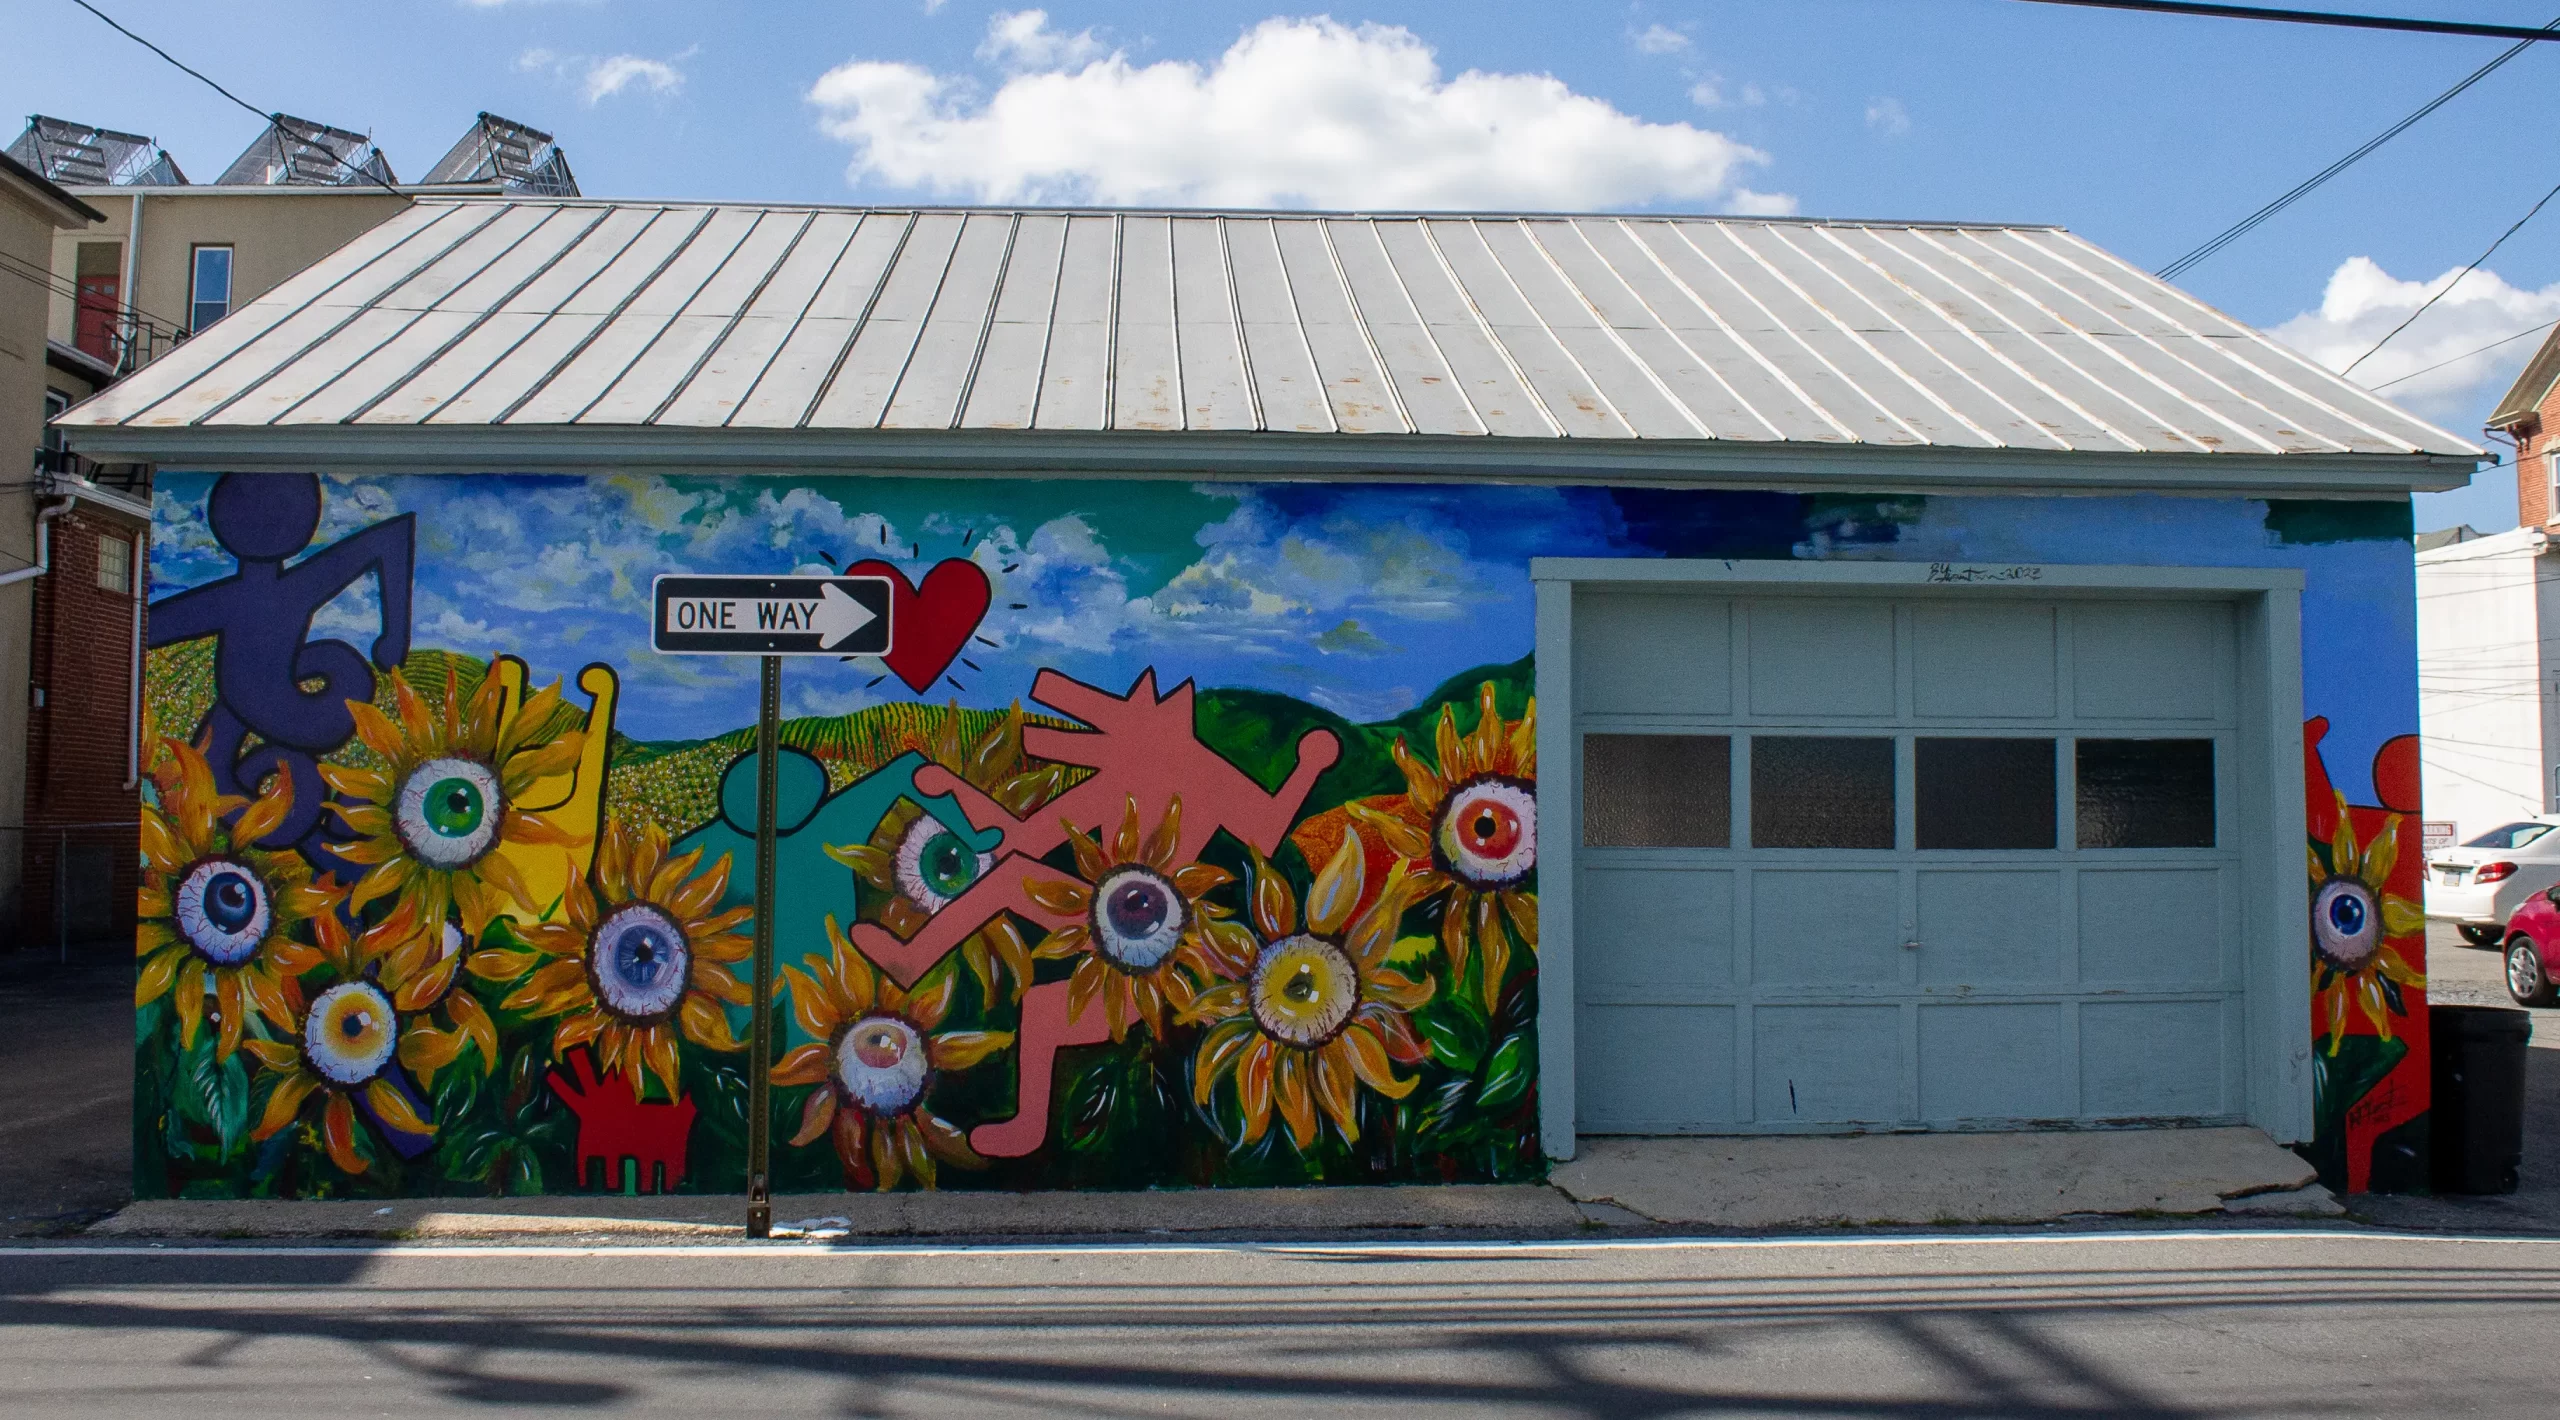 A shed in Kutztown painted with a Keith Haring-inspired mural.